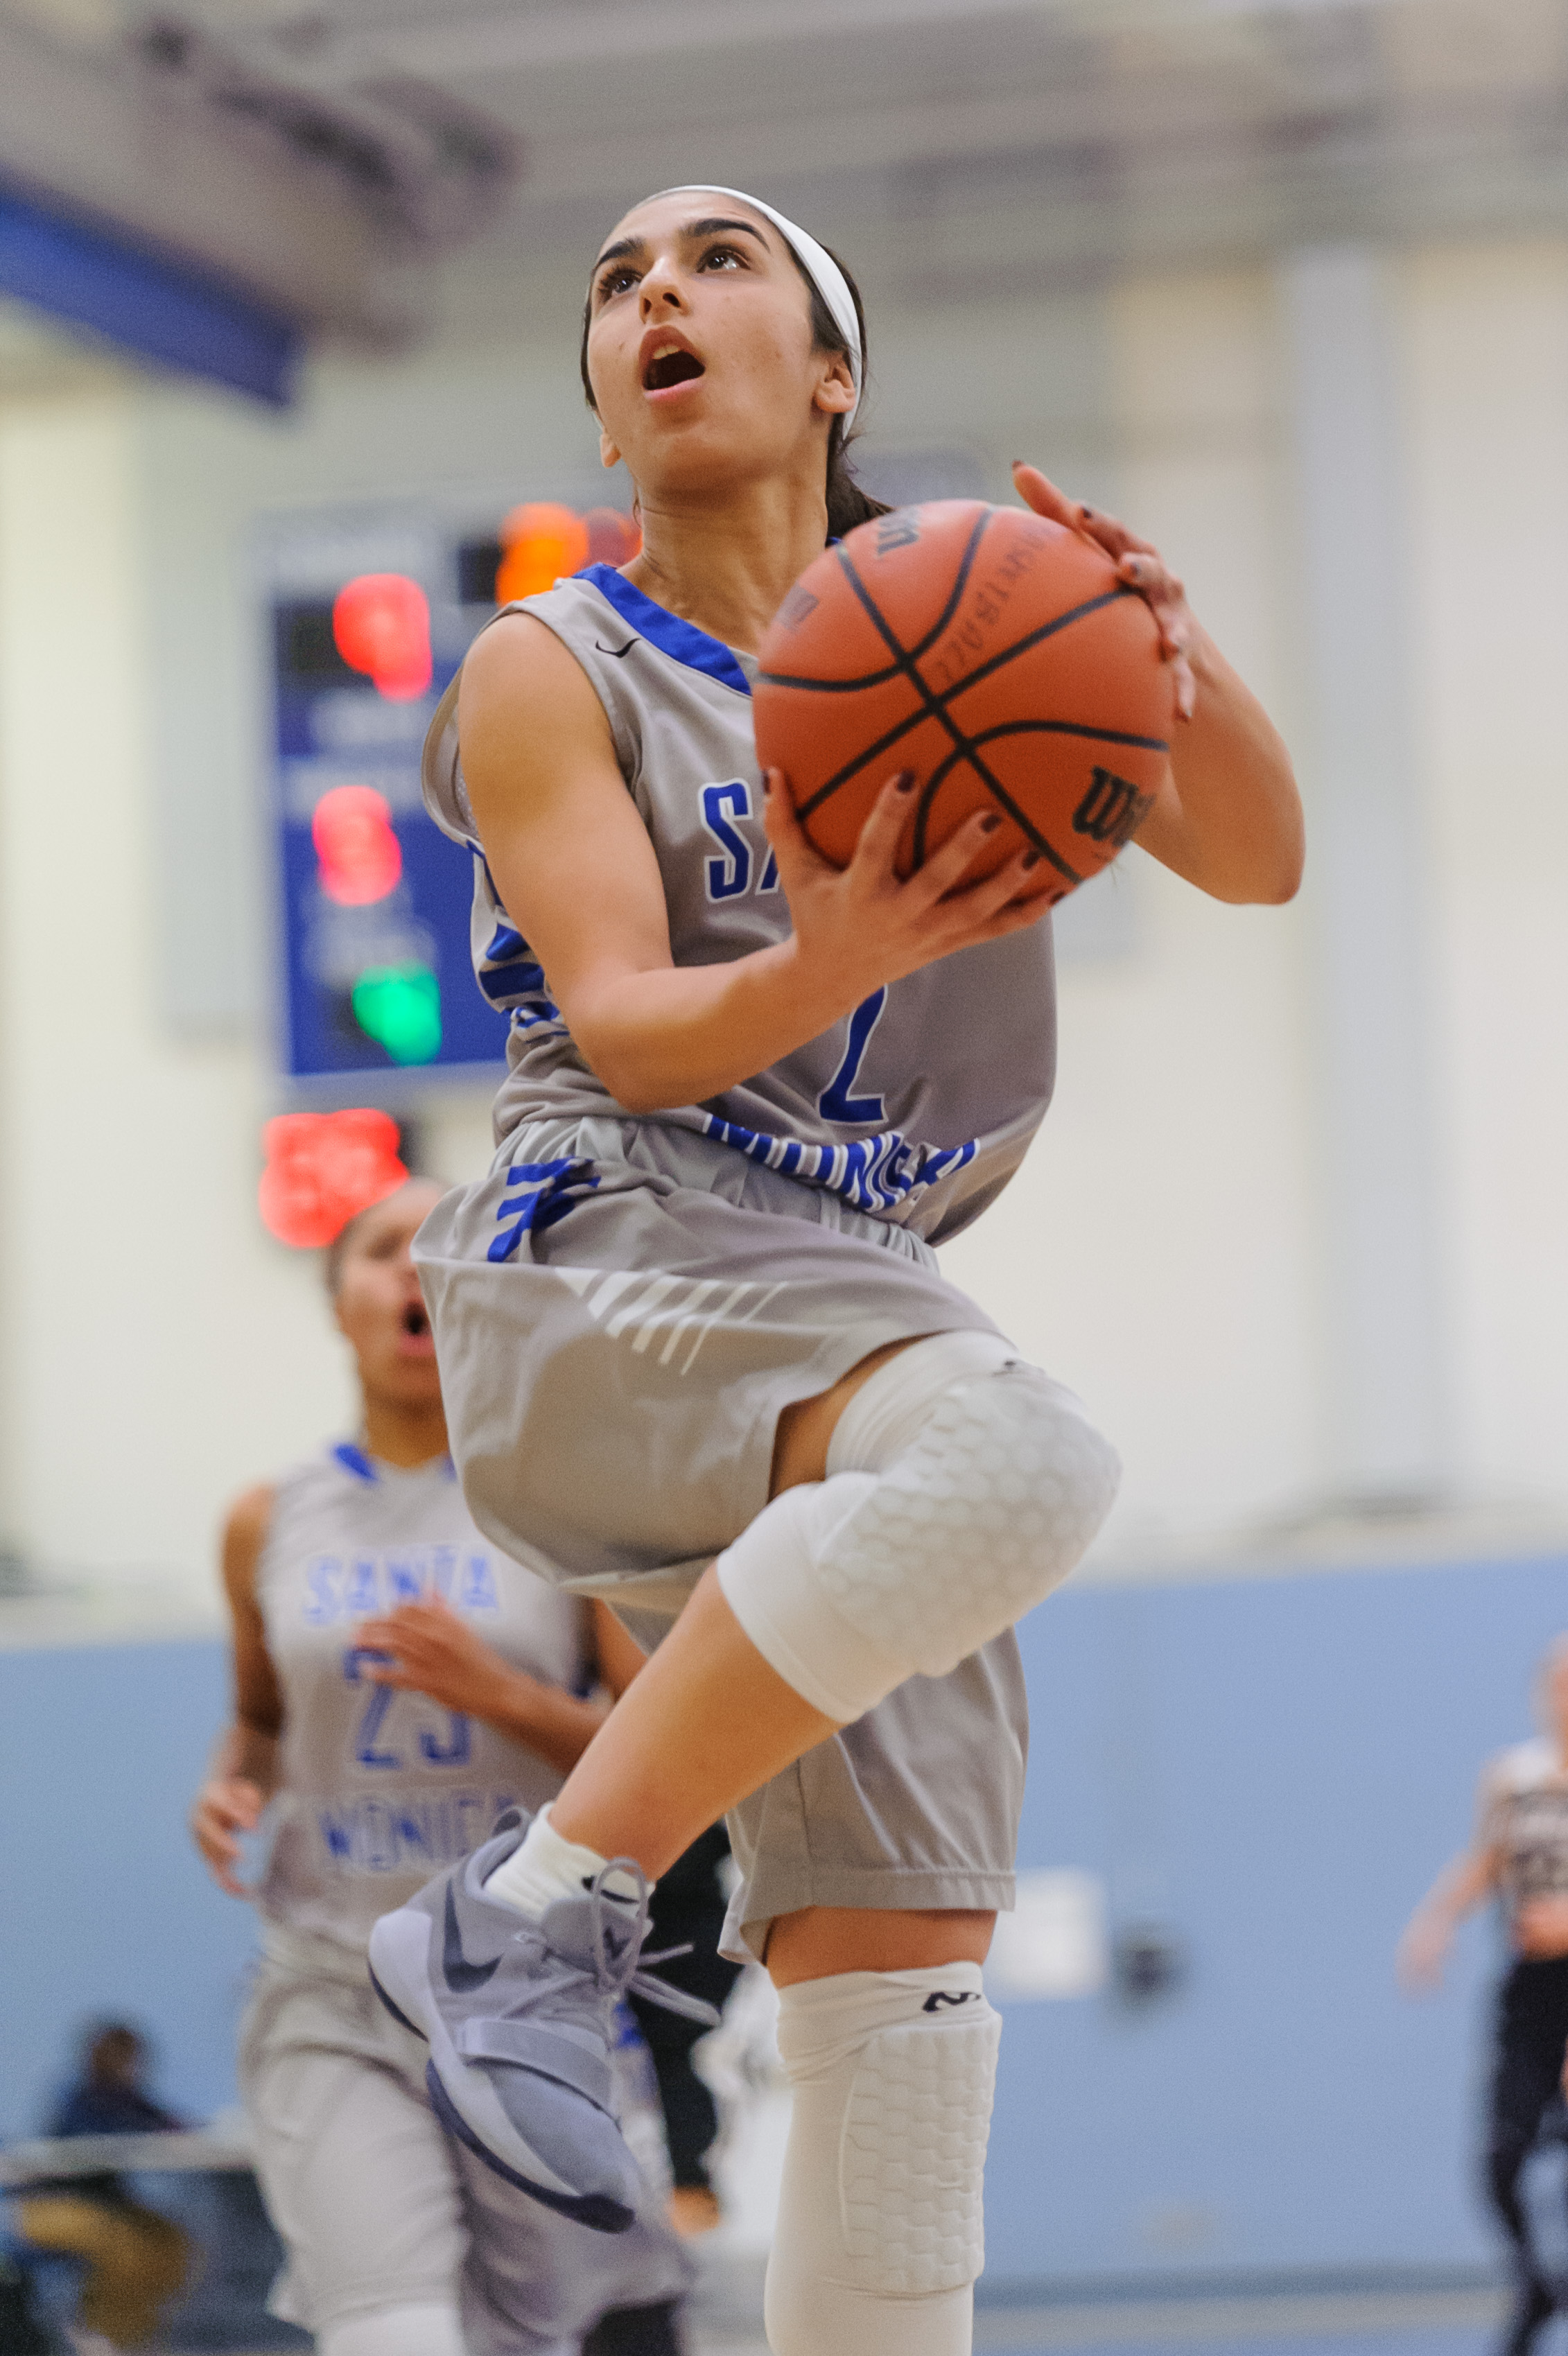  Guard Jessica Melamed (2) of Santa Monica College goes up for a reverse layup attempt. The Santa Monica College Corsairs win their final game of the season 76-53 against the Pierce College Brahmas. The game was held at the SMC Pavilion at the Santa 